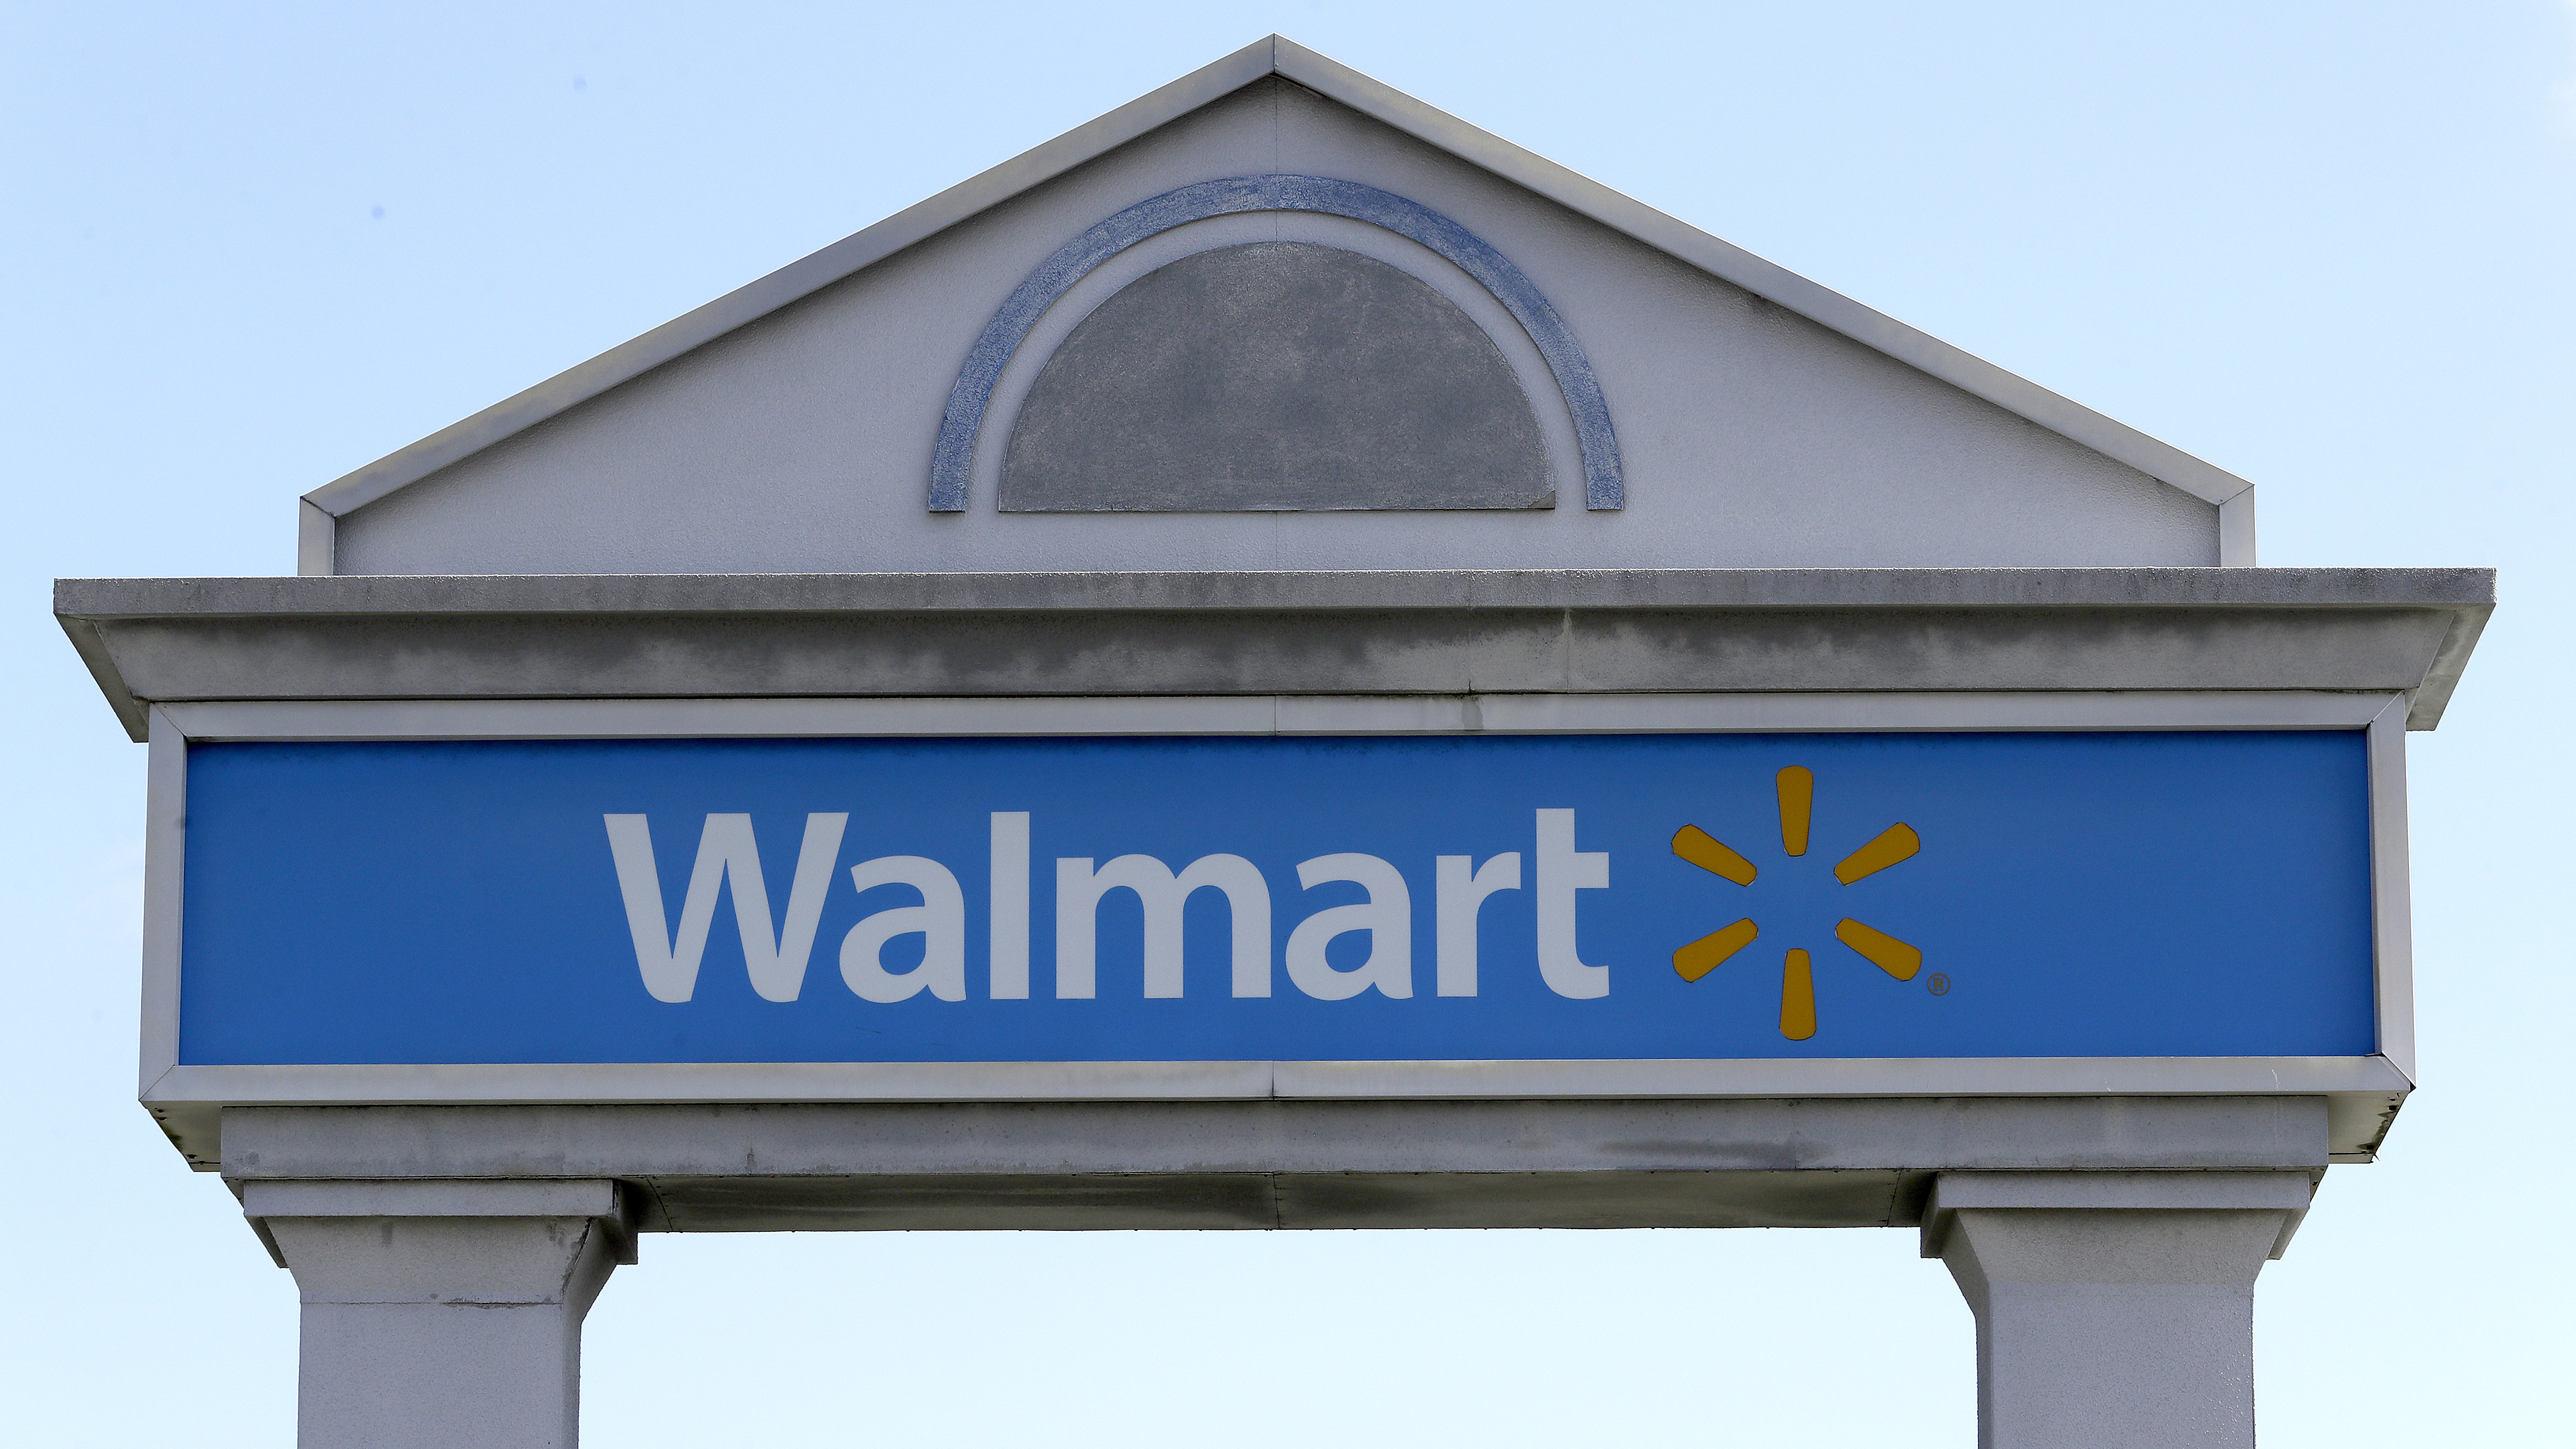 New Walmart program to turn college grads to managers, promises $200K salary